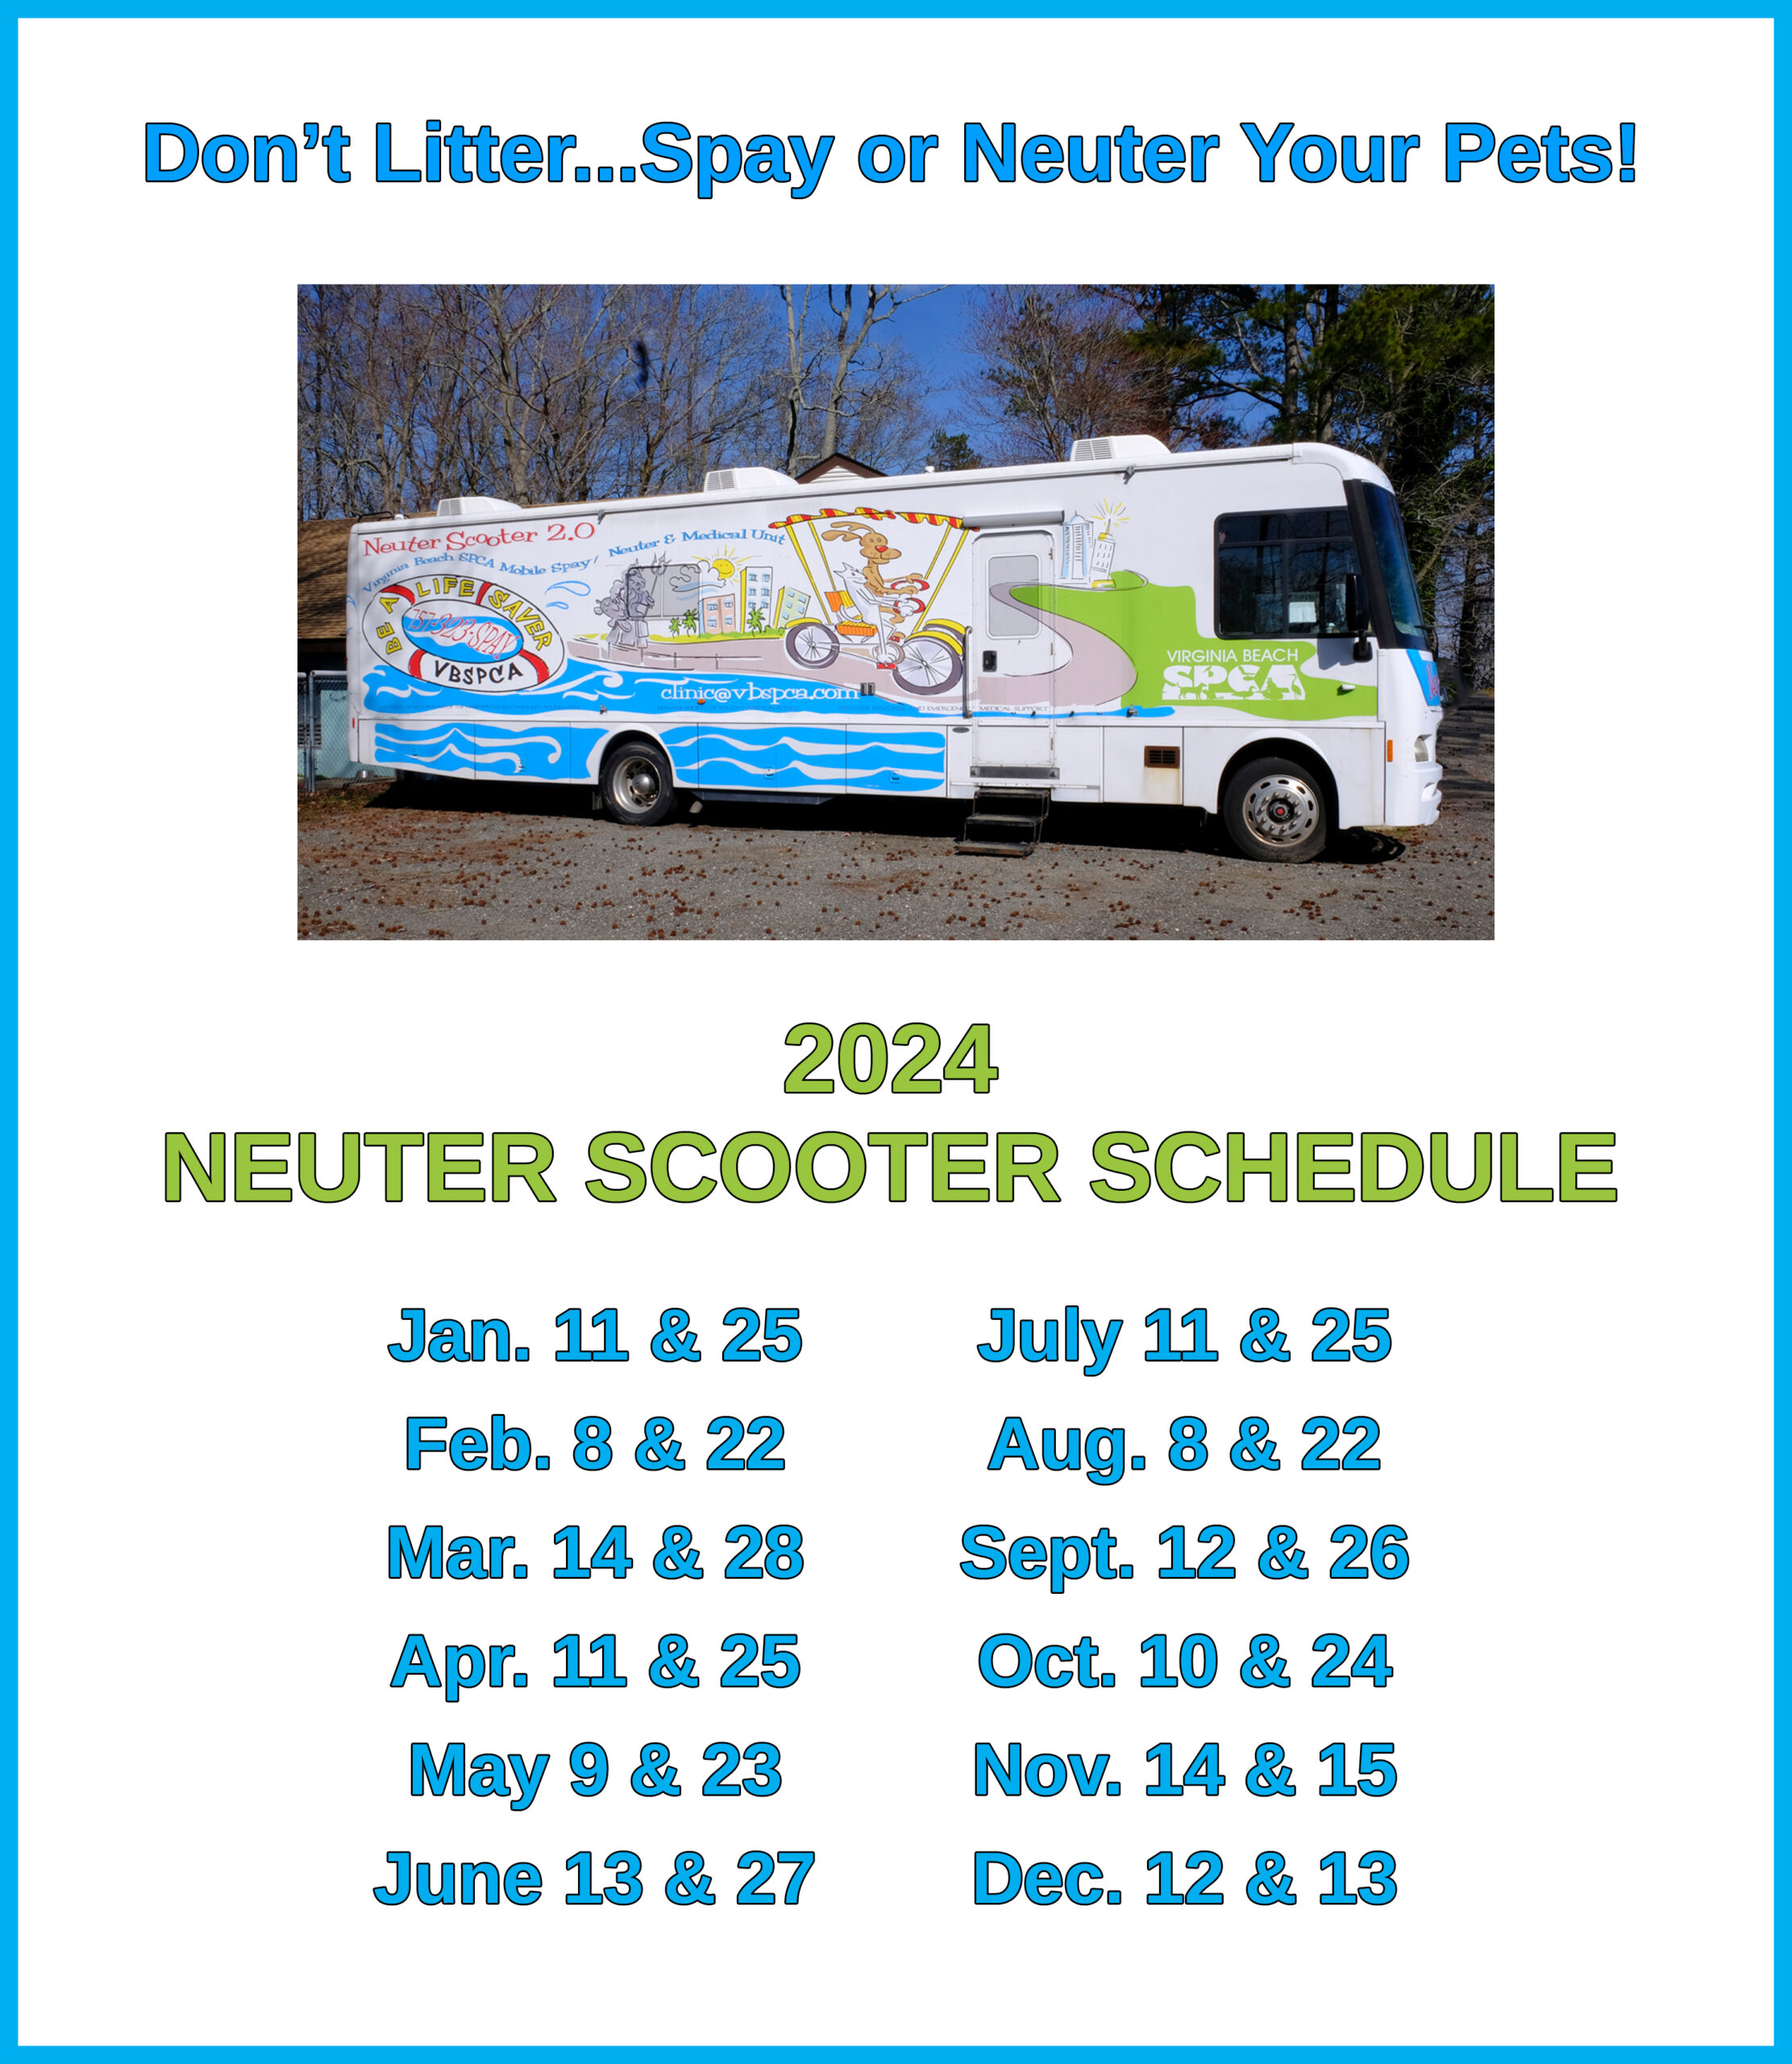 copy of the 2024 Neuter Scooter schedule